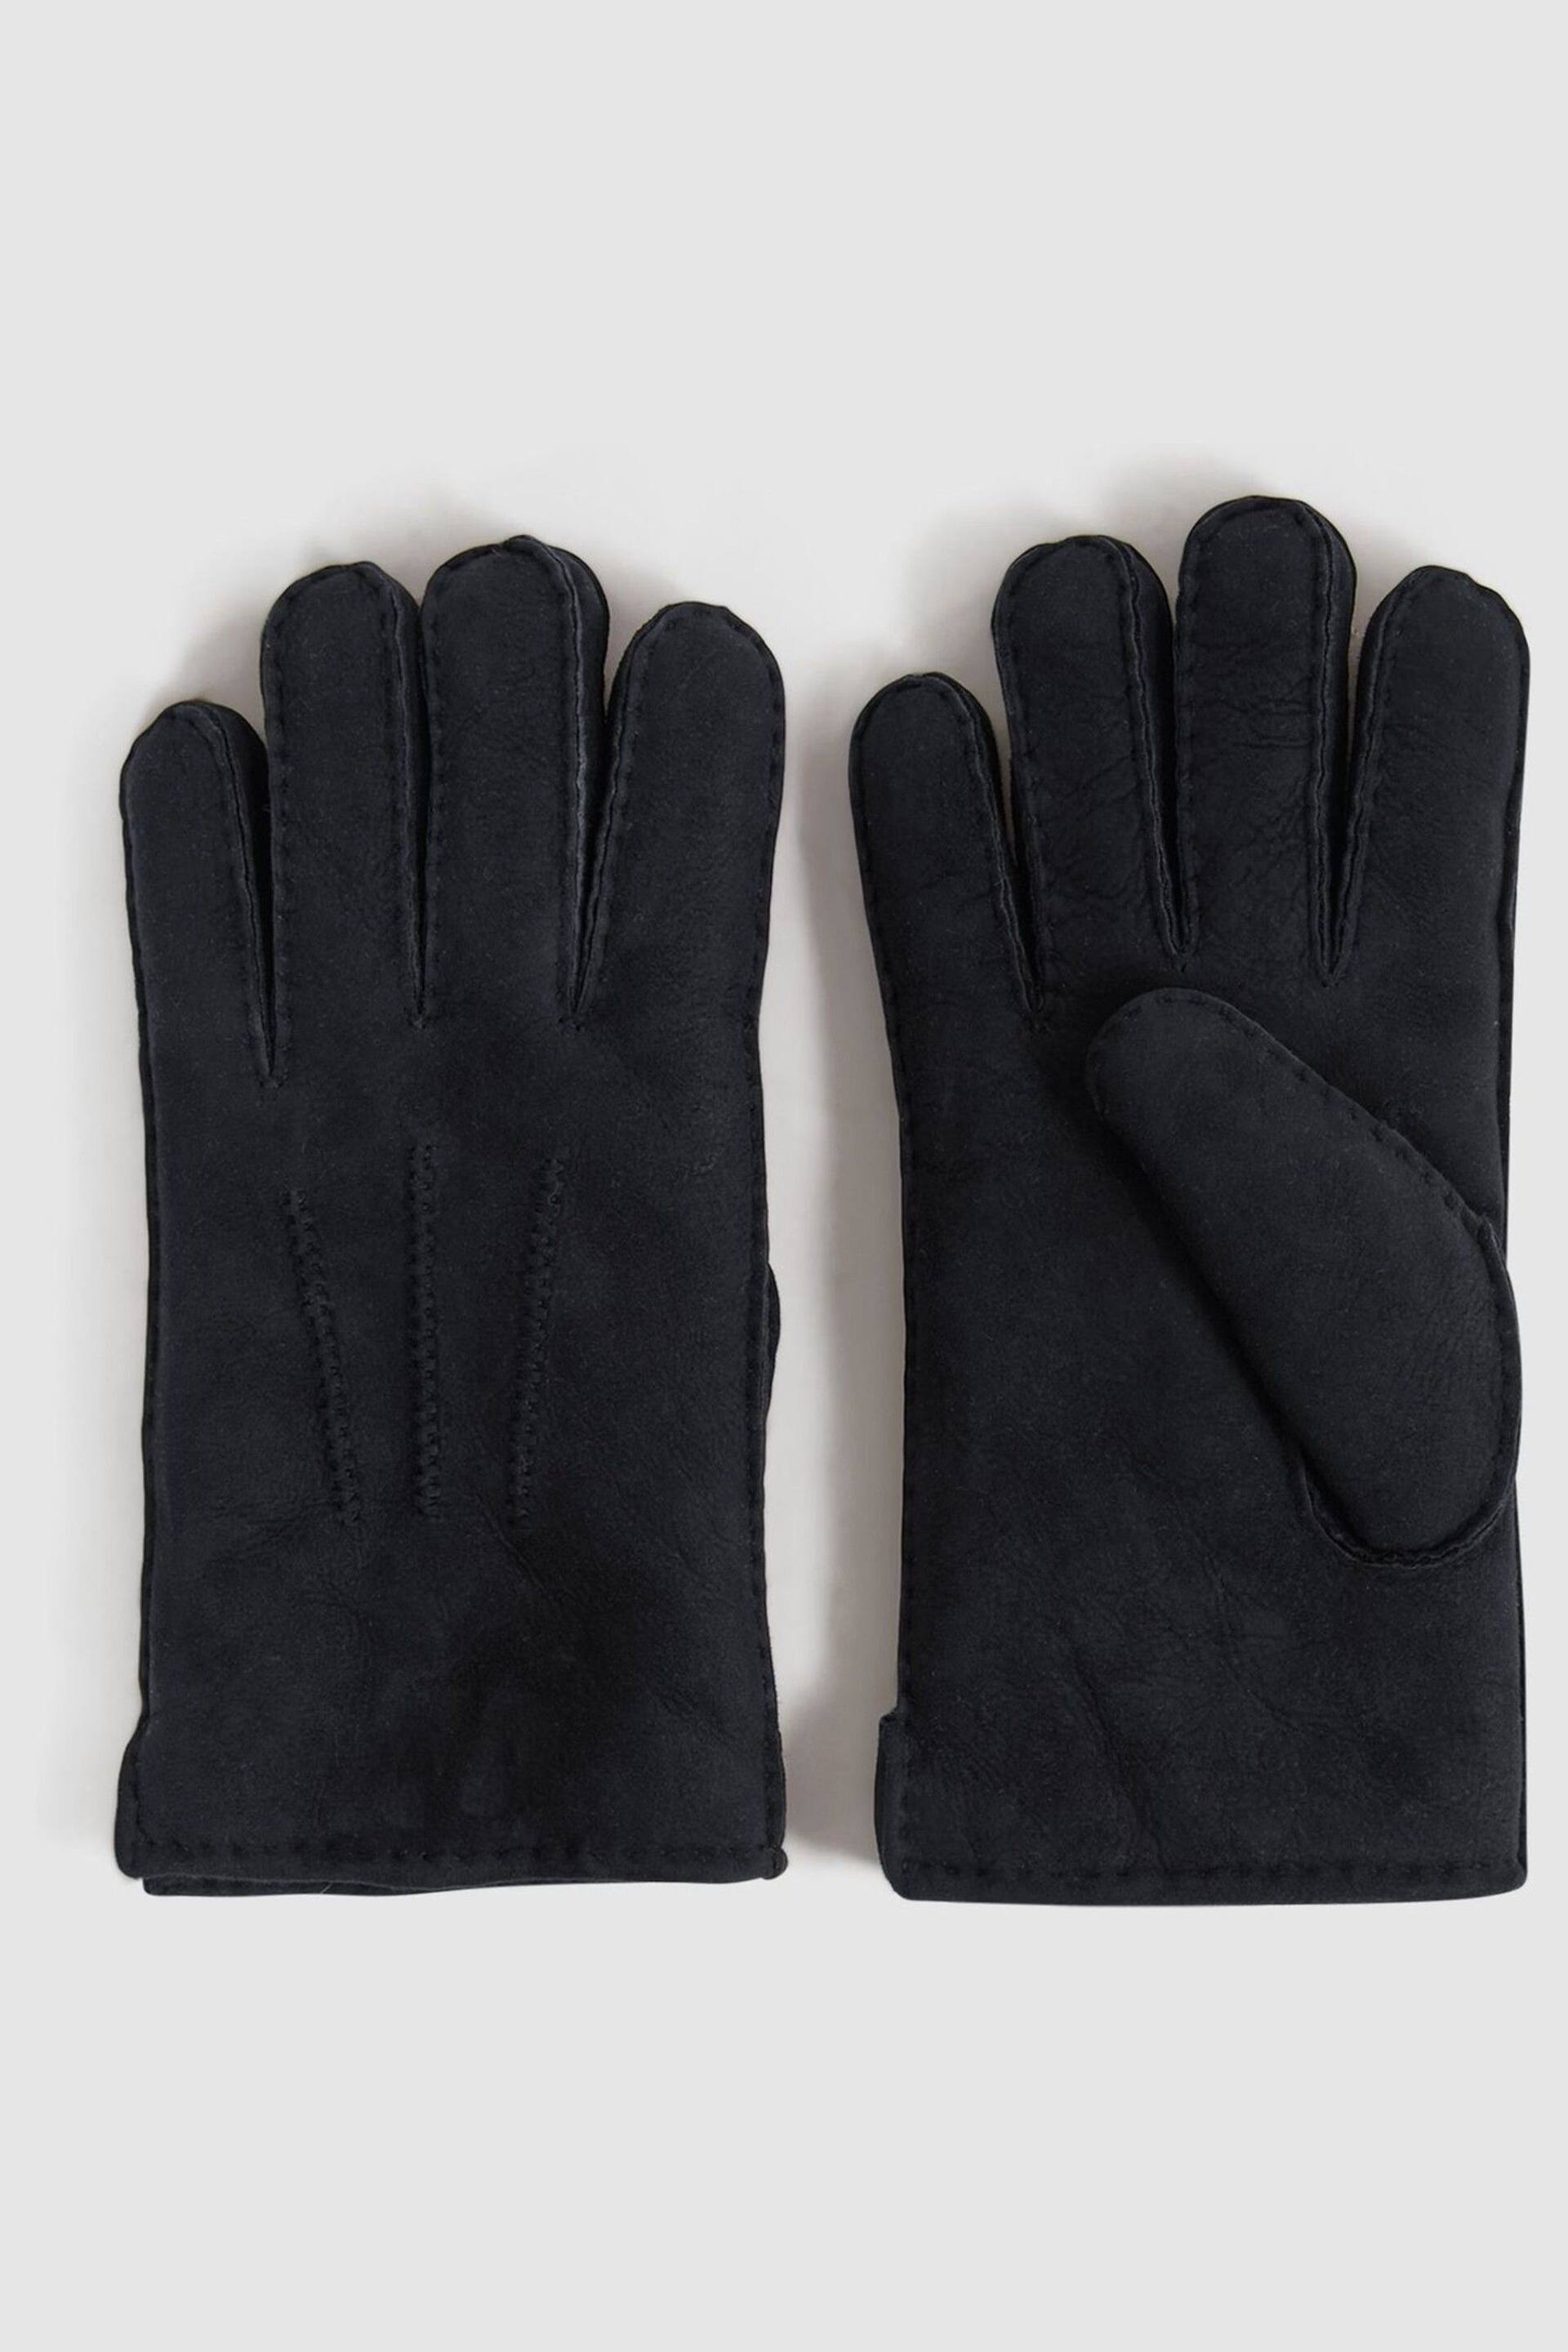 Reiss Black Aragon Suede Shearling Gloves - Image 1 of 3